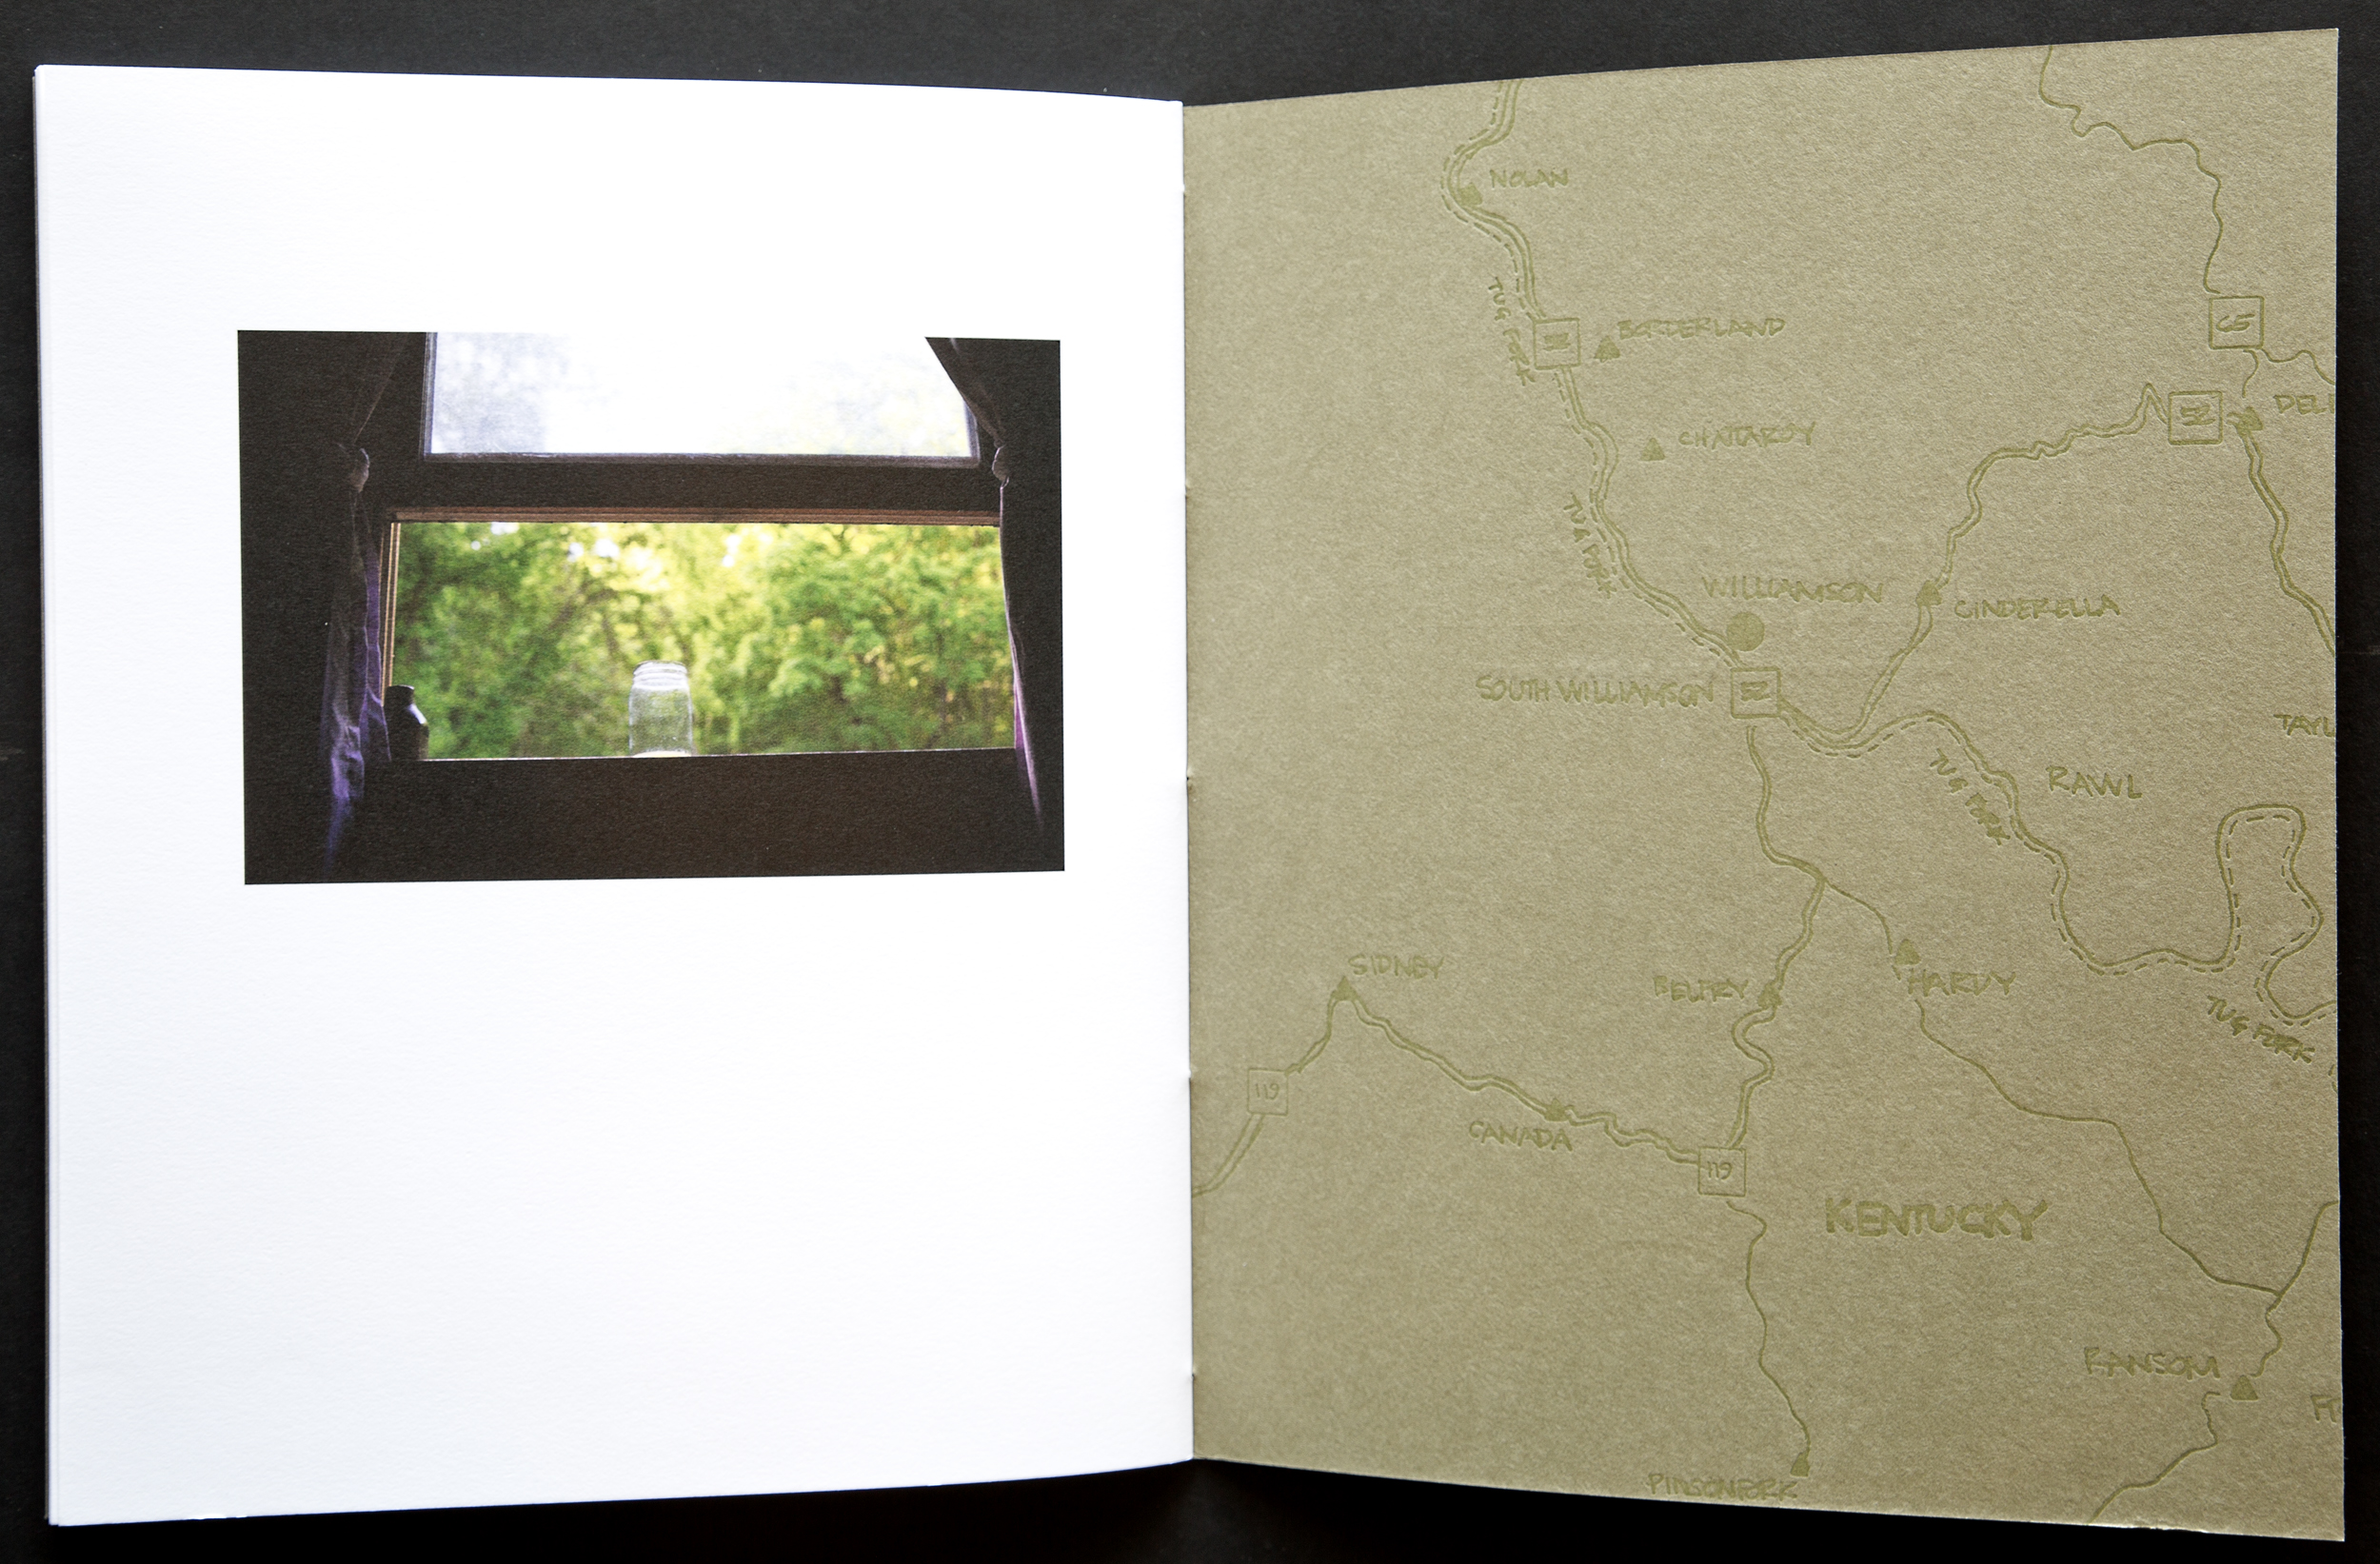  The image narrative is paused as volume one ends. The map on the inside back cover is lettepress printed and carries over onto the front cover of volume two. 